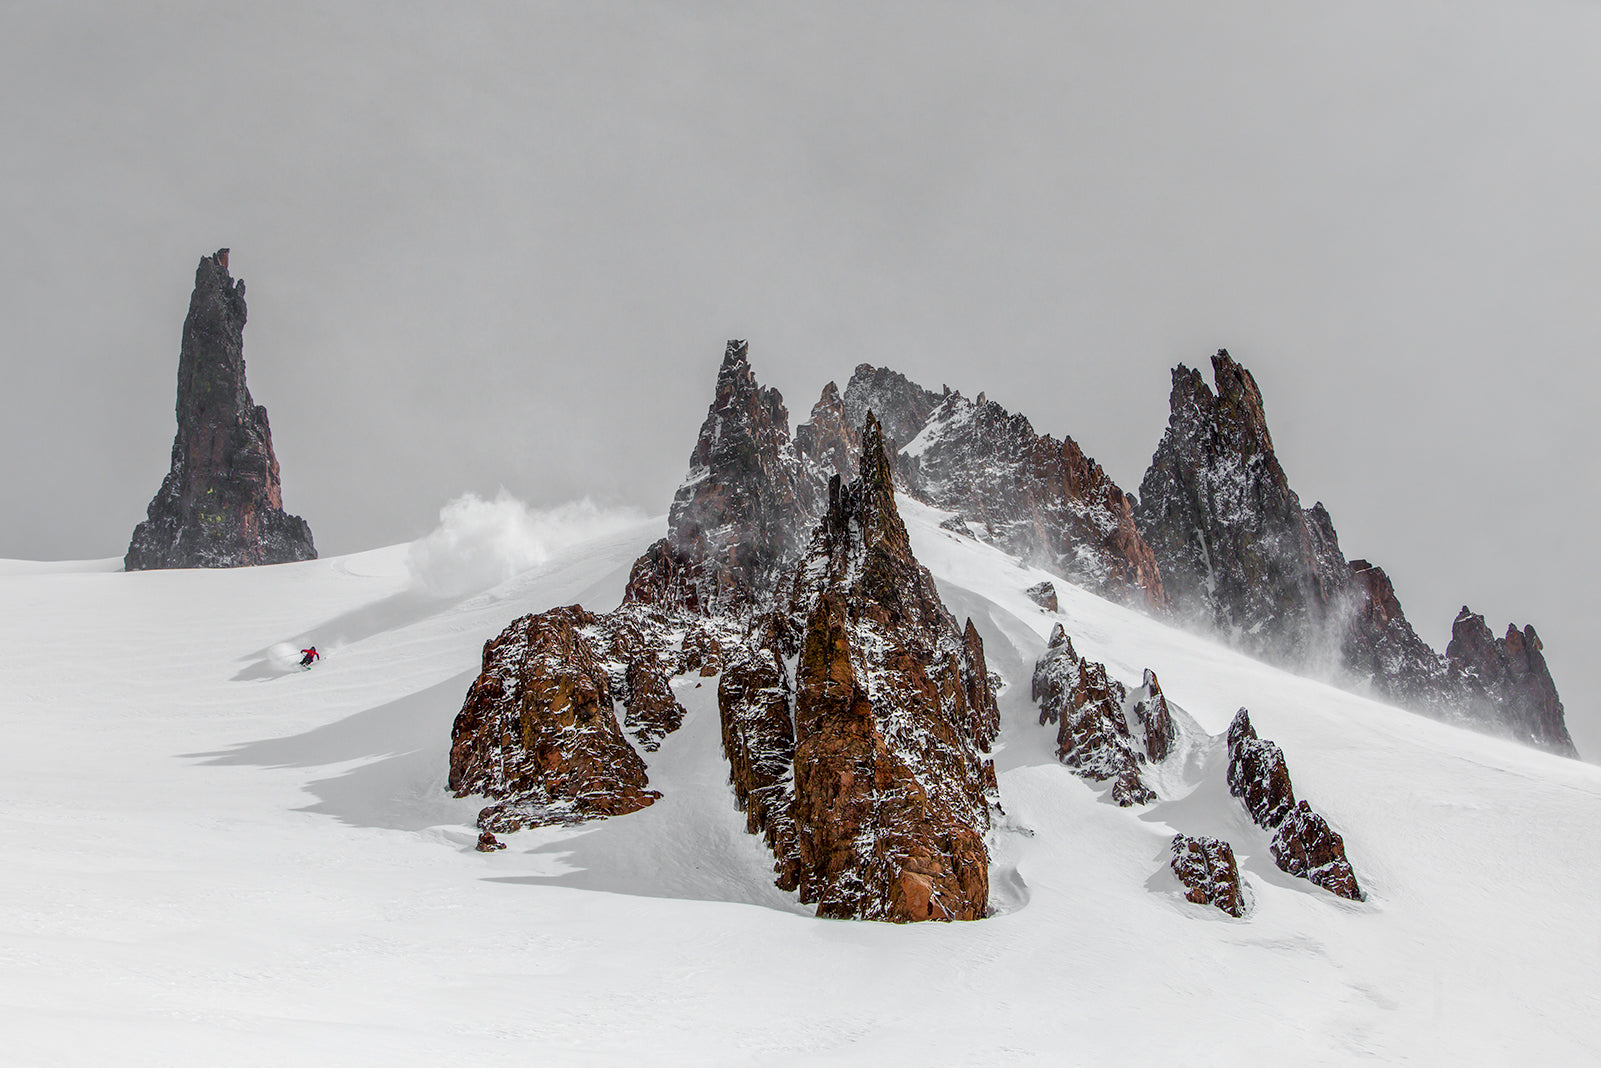 BACKCOUNTRY SKIING SPIRES